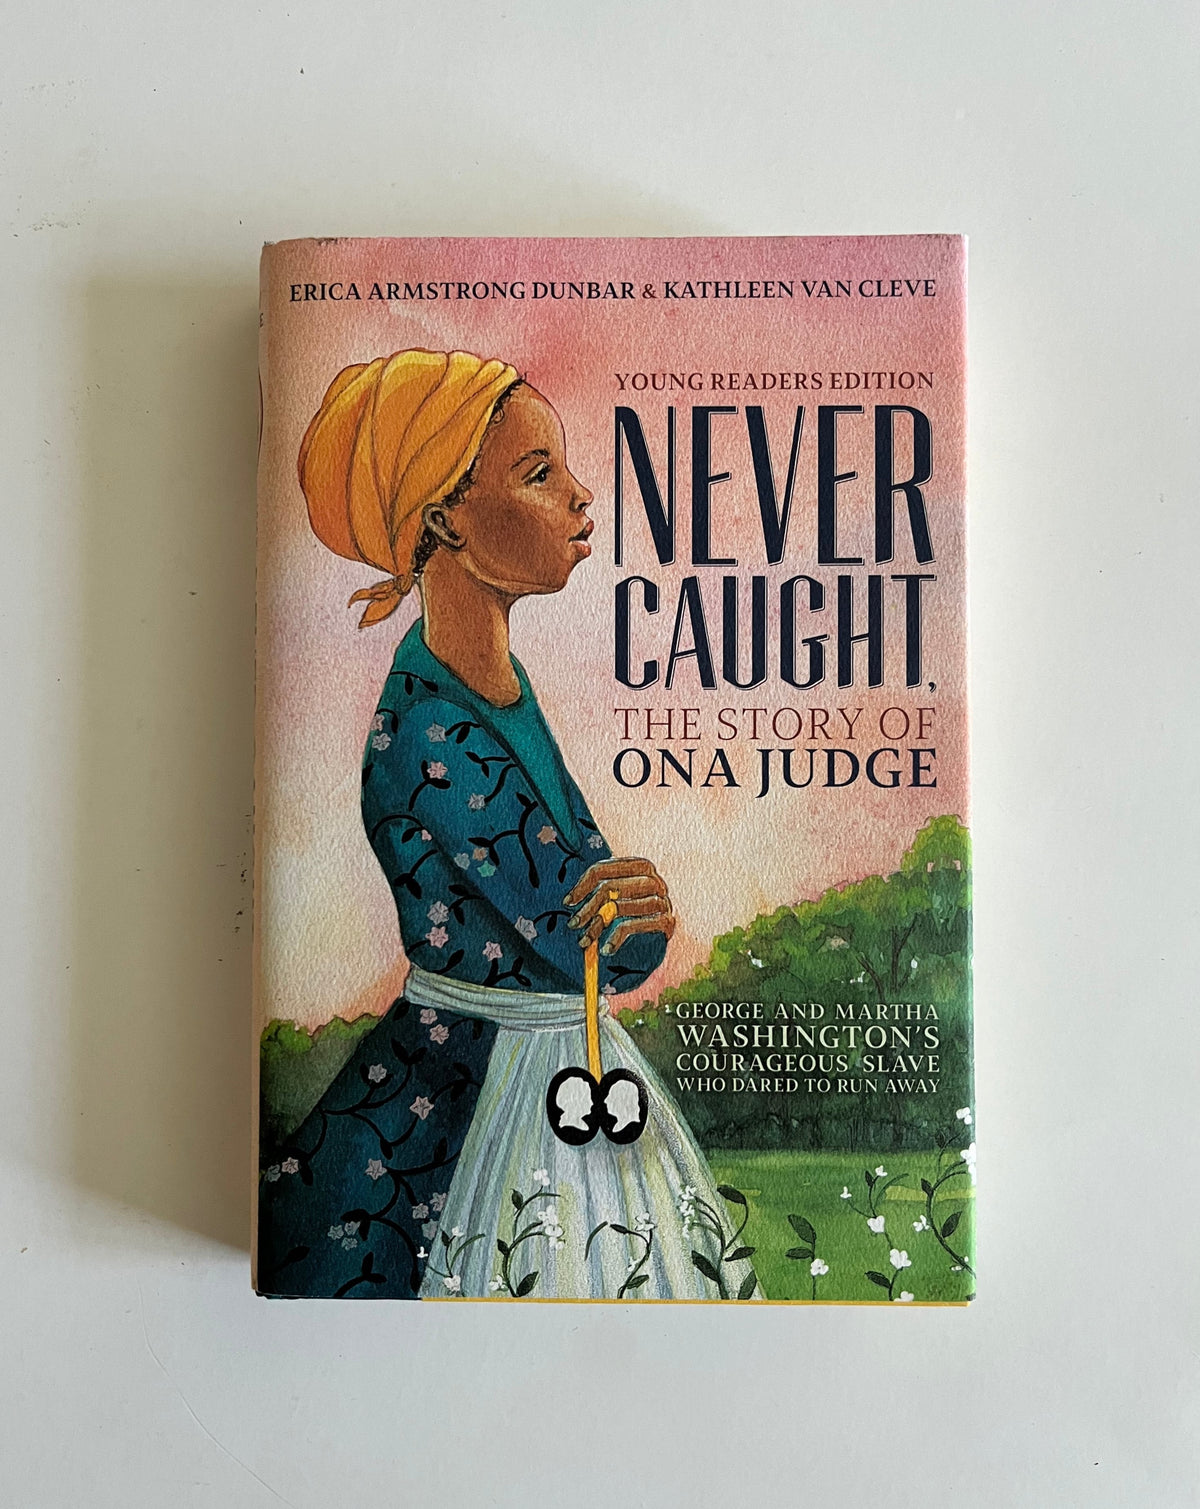 Never Caught: The Story of Ona Judge (young readers edition) by Erica Armstrong Dunbar